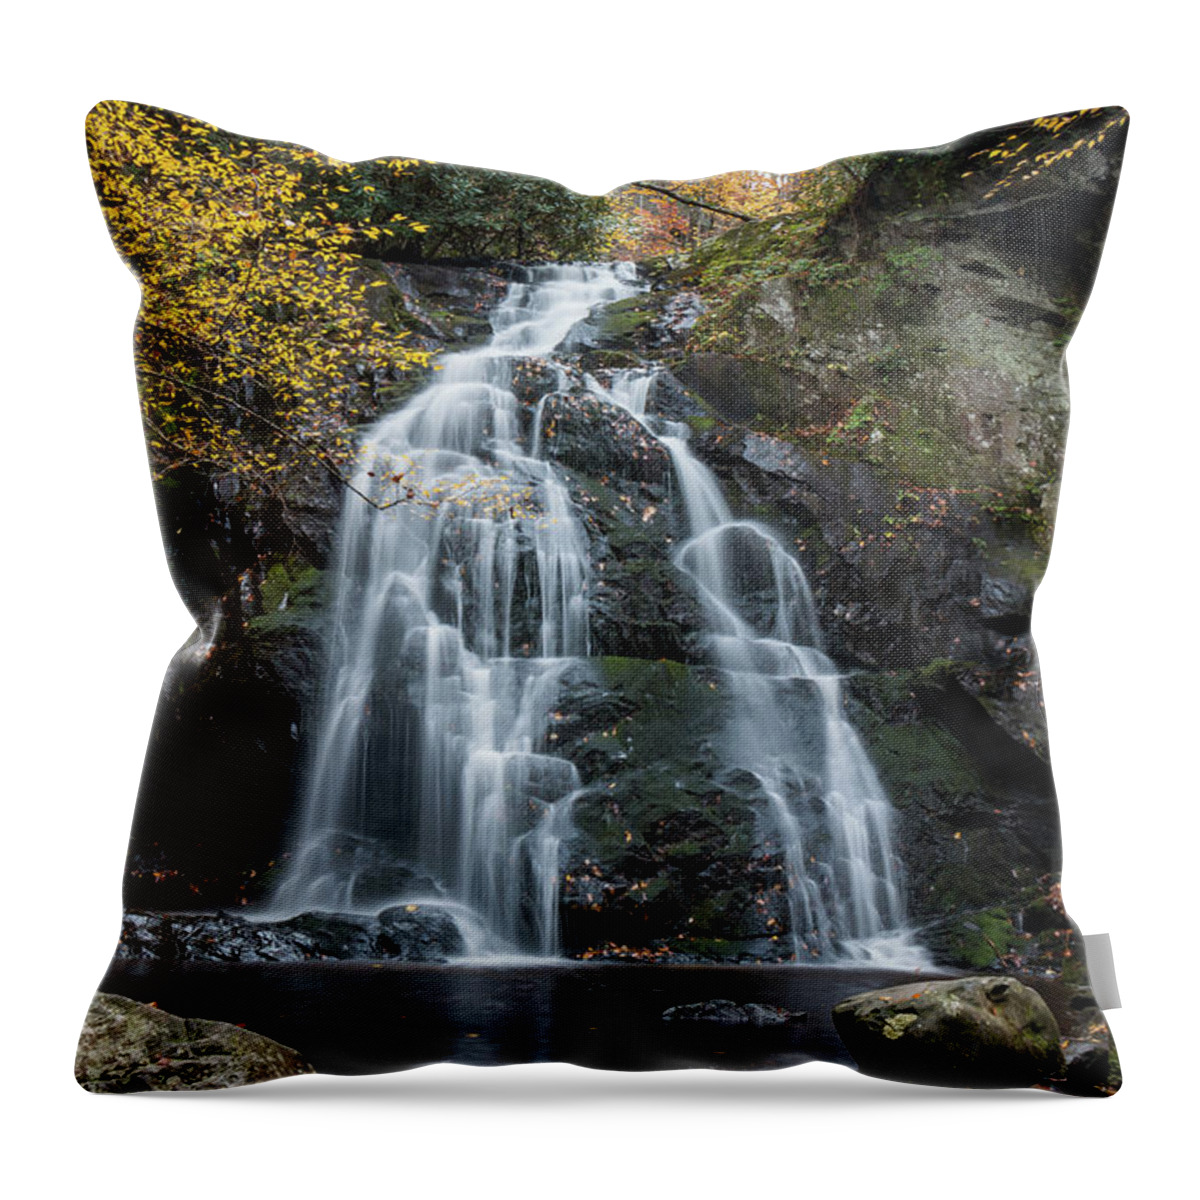 Spruce Flats Falls Throw Pillow featuring the photograph Spruce Flats Falls by Chris Berrier